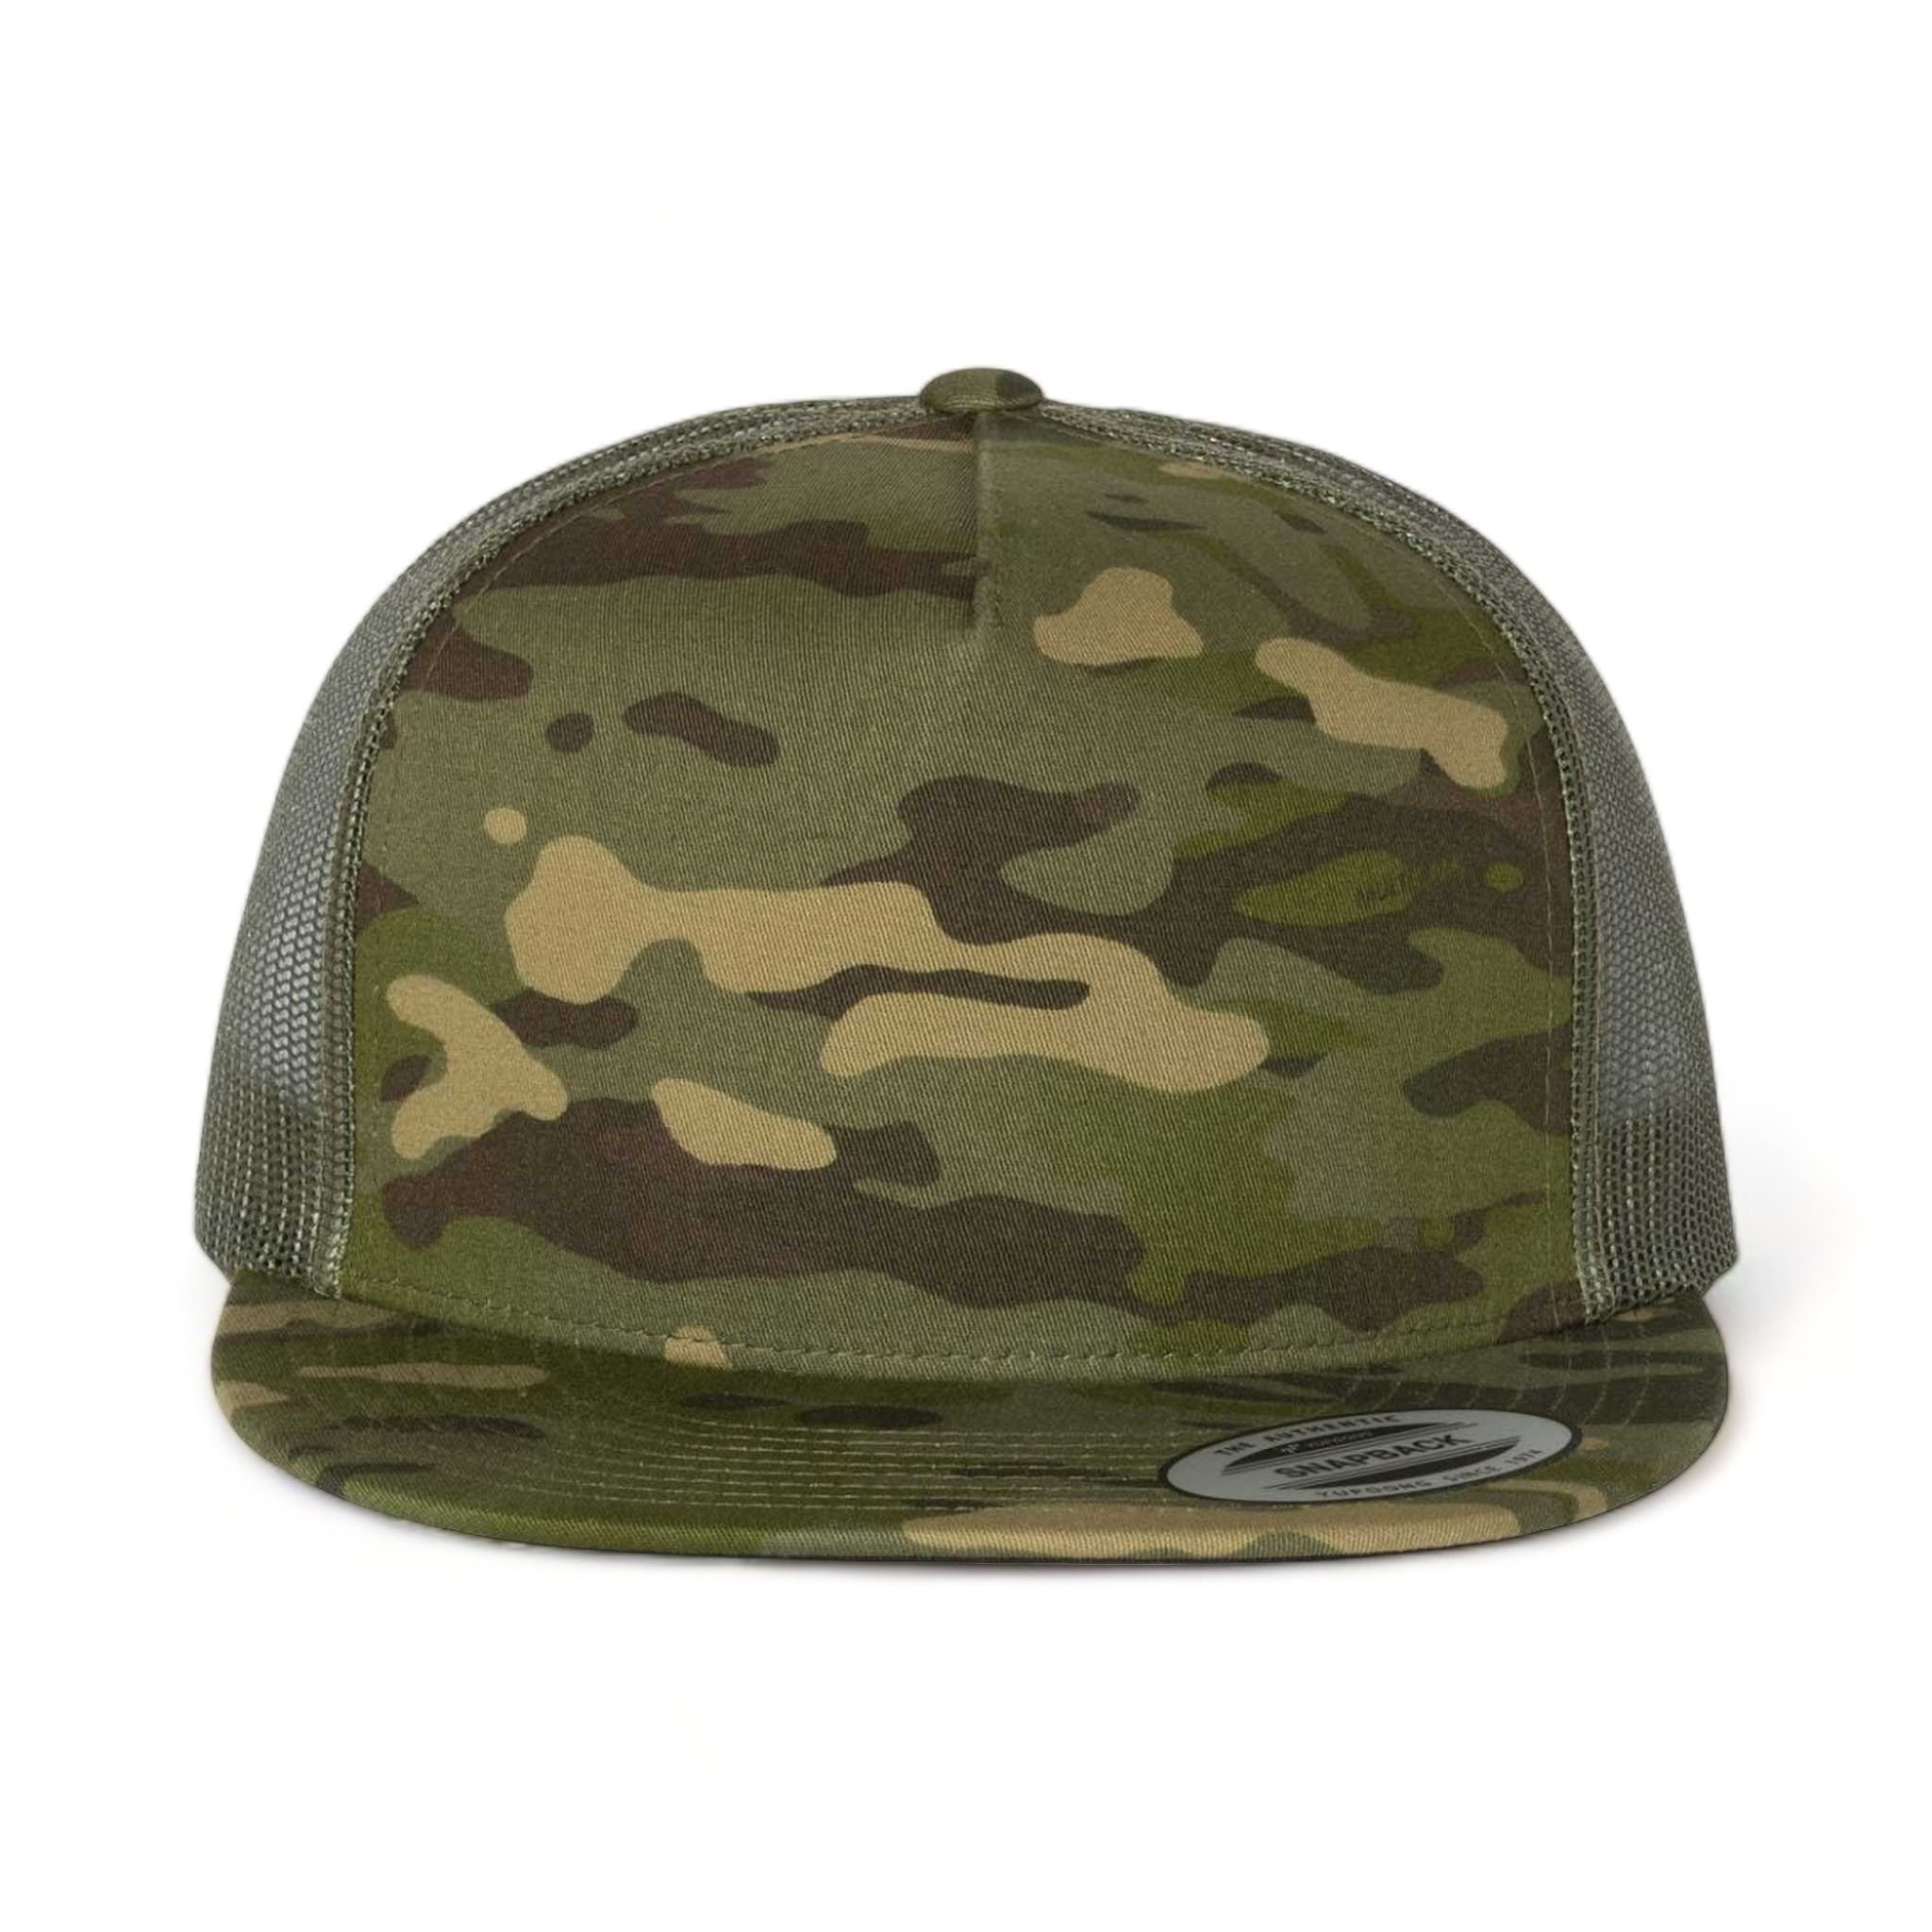 Front view of YP Classics 6006 custom hat in multicam tropic and green